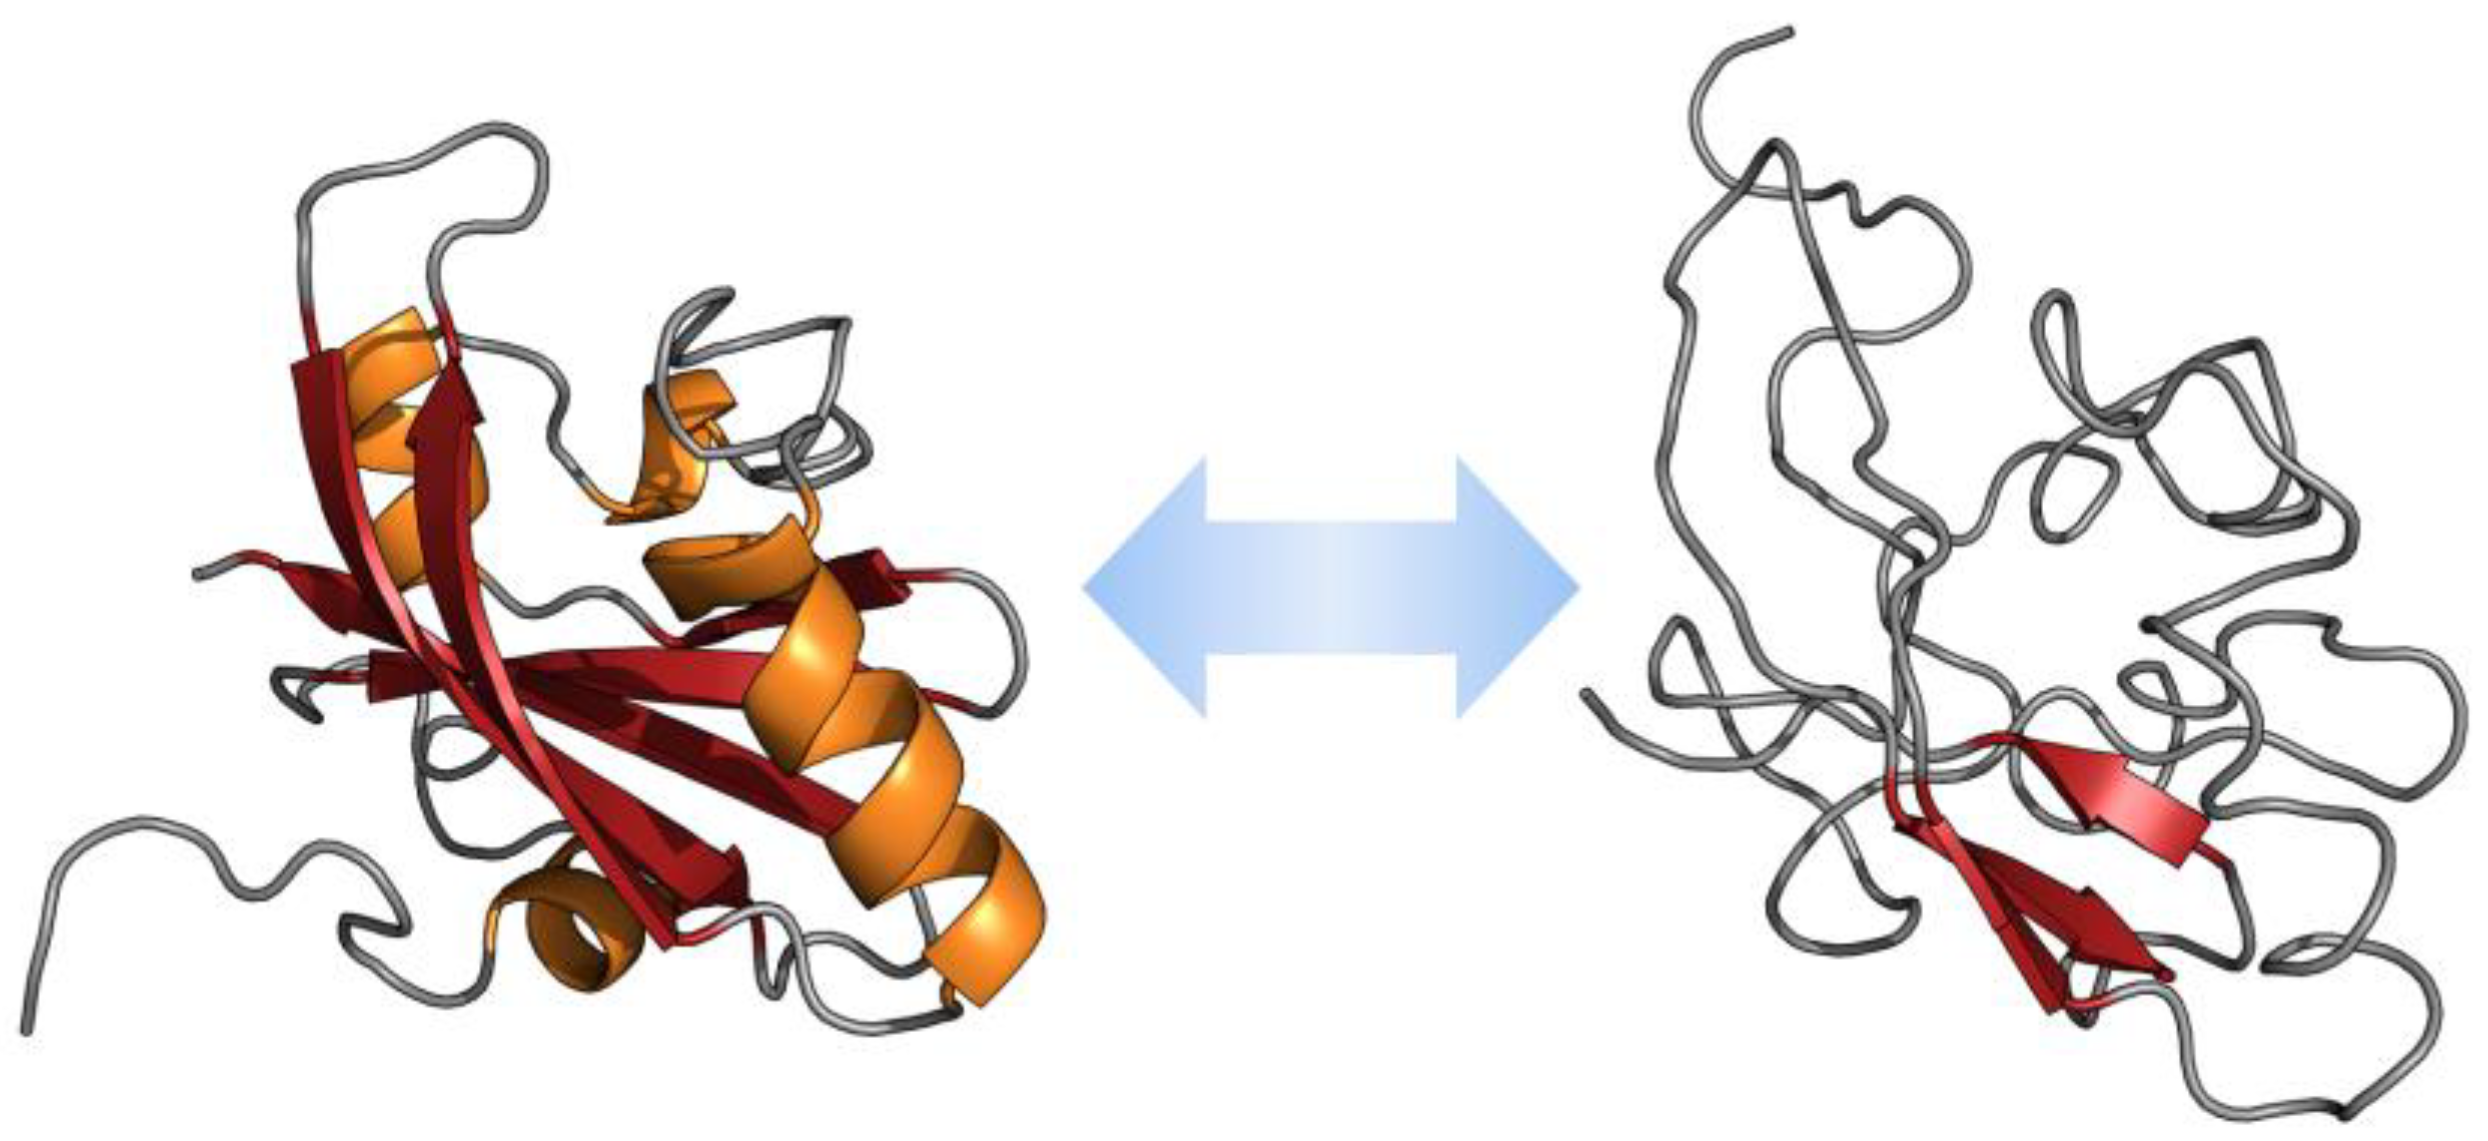 IJMS | Free Full-Text | Modulation of Disordered Proteins with a 